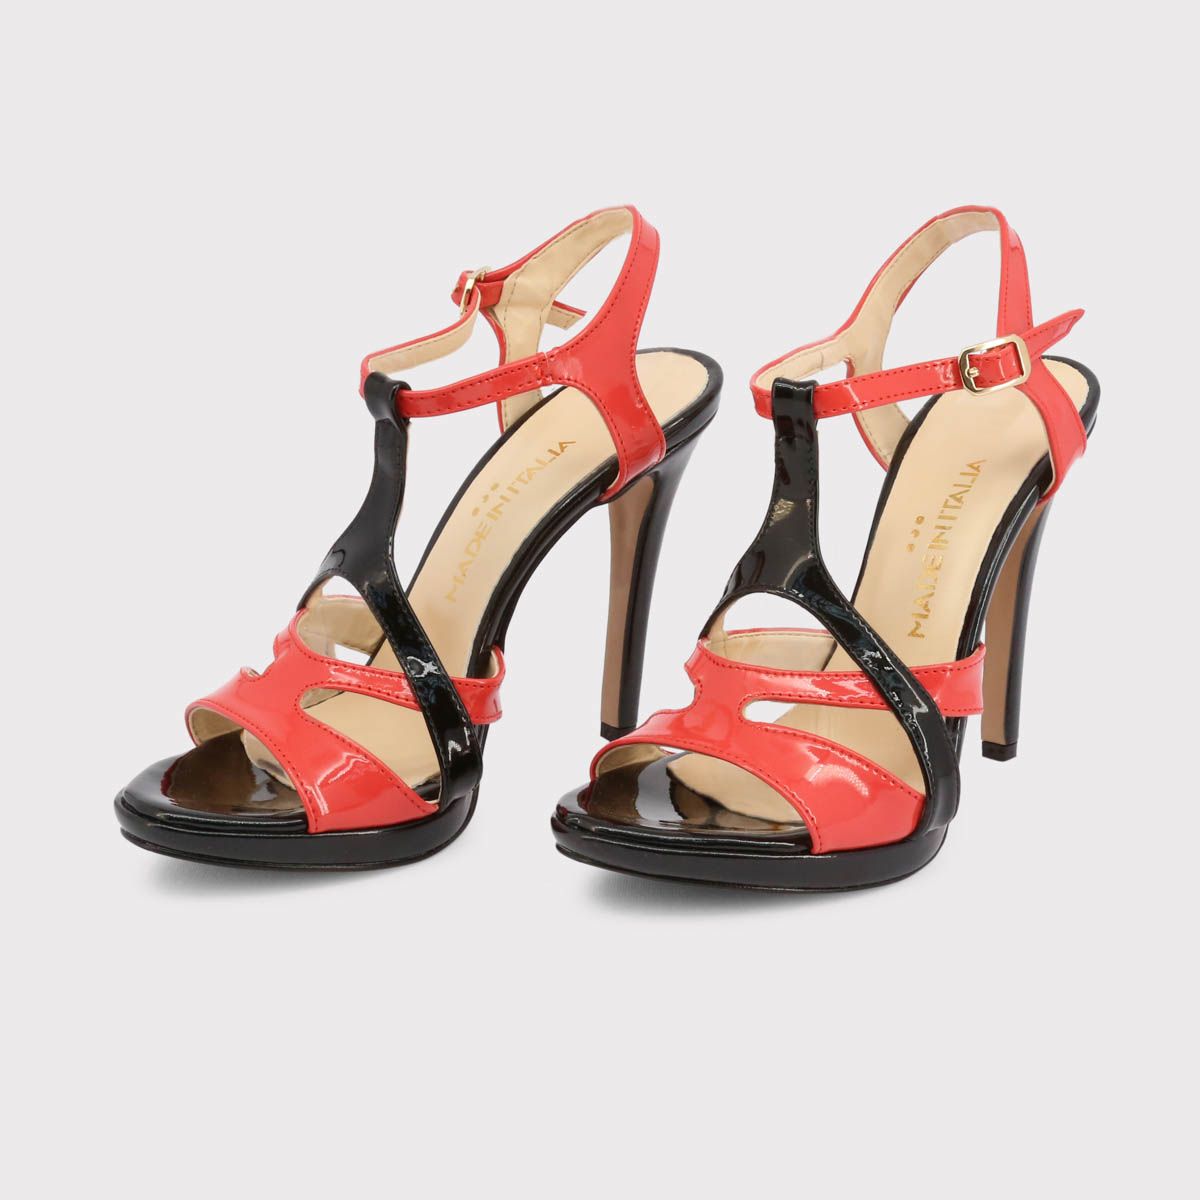 Womens shoes <br> Collection SS <br> 100% made in ITALY <br> Woman Sandals <br> Upper:  synthetic leather <br> Insole:  leather <br> Sole:  rubber <br> closing with adjustable side buckle <br> heel 10 cm, plateau 1 cm